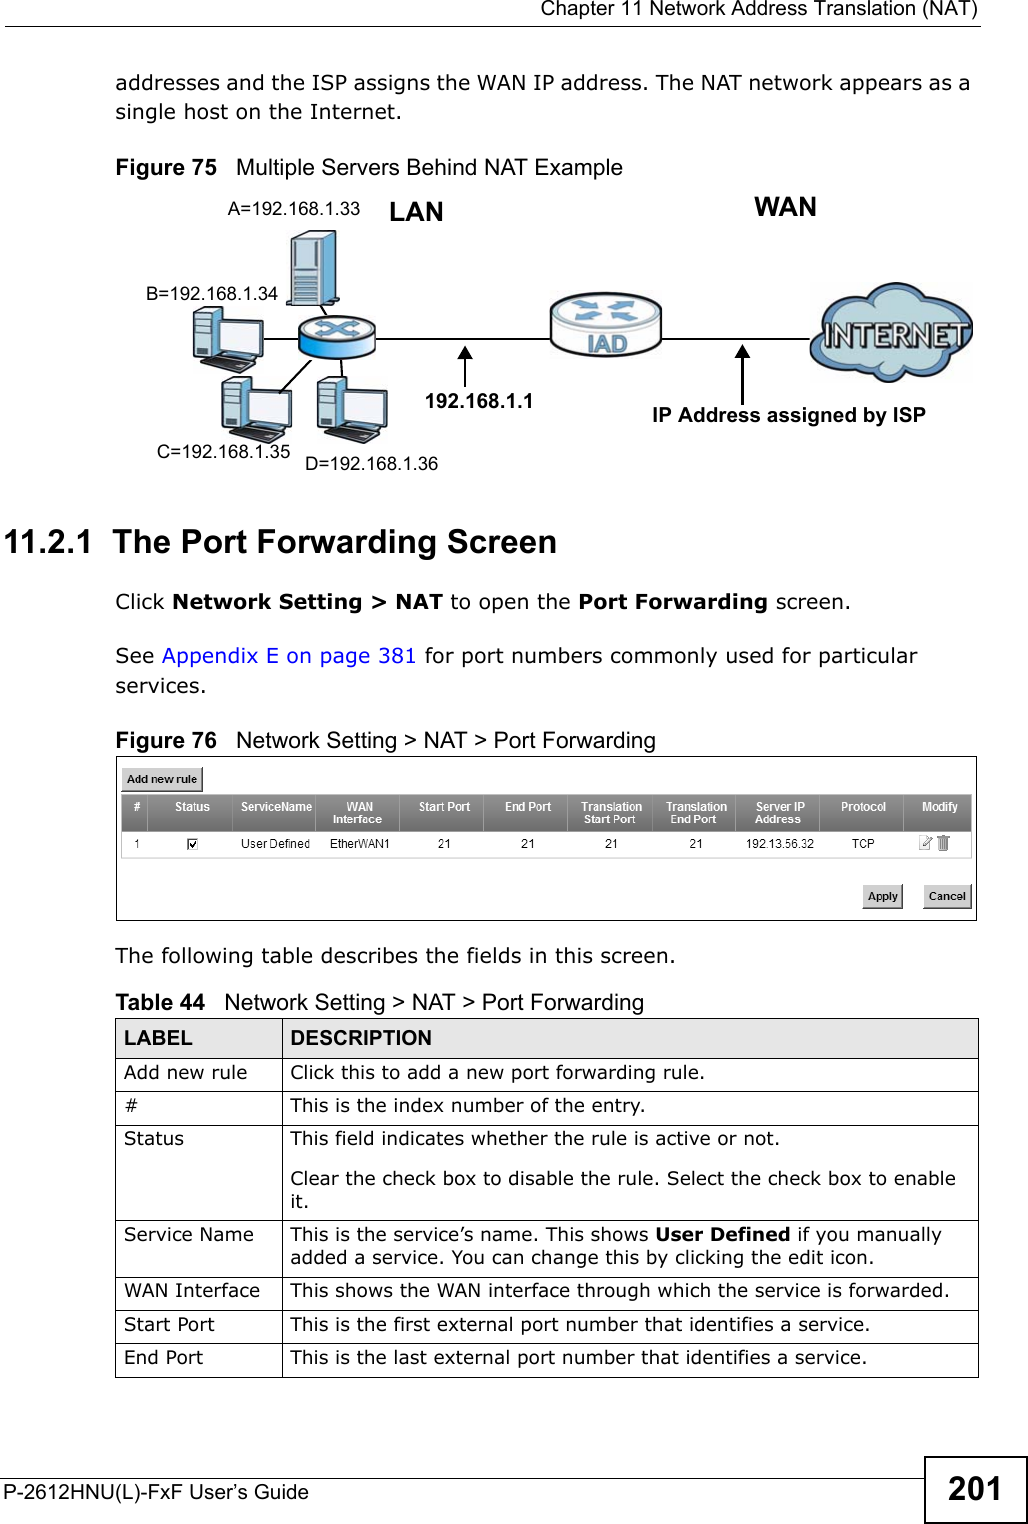  Chapter 11 Network Address Translation (NAT)P-2612HNU(L)-FxF User’s Guide 201addresses and the ISP assigns the WAN IP address. The NAT network appears as a single host on the Internet.Figure 75   Multiple Servers Behind NAT Example11.2.1  The Port Forwarding ScreenClick Network Setting &gt; NAT to open the Port Forwarding screen.See Appendix E on page 381 for port numbers commonly used for particular services. Figure 76   Network Setting &gt; NAT &gt; Port ForwardingThe following table describes the fields in this screen.A=192.168.1.33D=192.168.1.36C=192.168.1.35B=192.168.1.34WANLAN192.168.1.1 IP Address assigned by ISPTable 44   Network Setting &gt; NAT &gt; Port ForwardingLABEL DESCRIPTIONAdd new rule Click this to add a new port forwarding rule.# This is the index number of the entry.Status This field indicates whether the rule is active or not.Clear the check box to disable the rule. Select the check box to enable it.Service Name This is the service’s name. This shows User Defined if you manually added a service. You can change this by clicking the edit icon.WAN Interface This shows the WAN interface through which the service is forwarded.Start Port  This is the first external port number that identifies a service.End Port This is the last external port number that identifies a service.